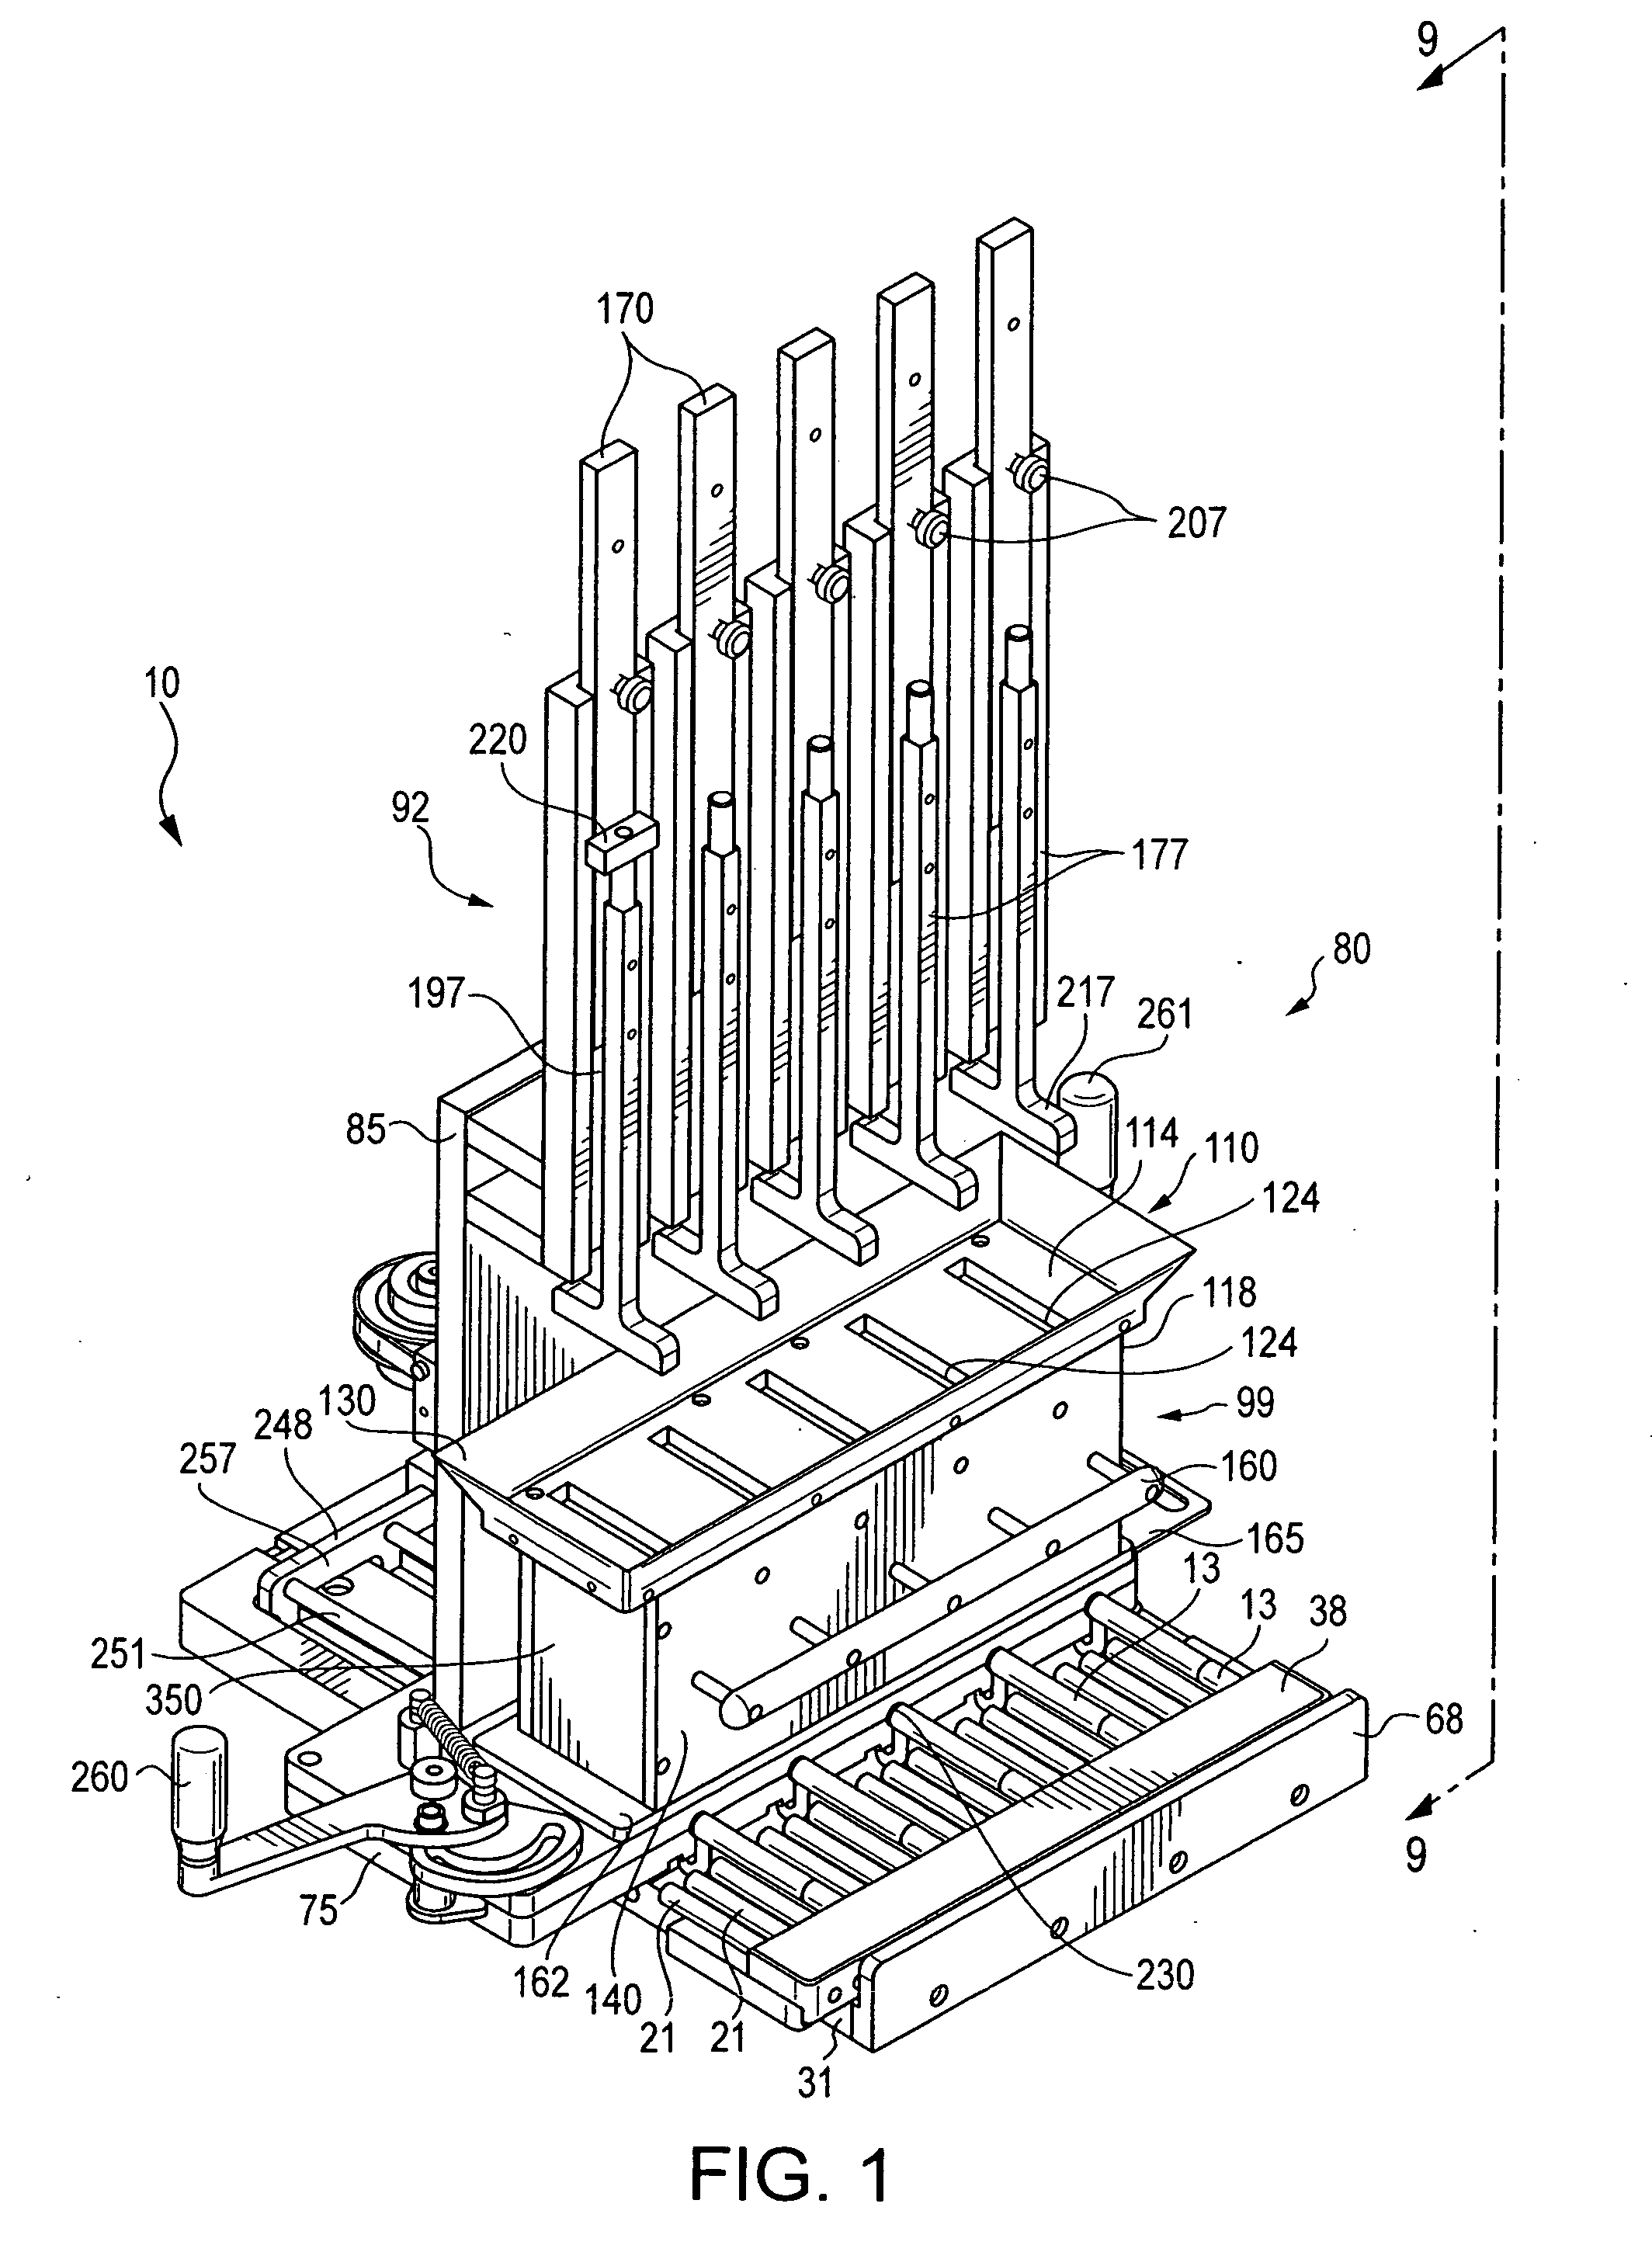 Apparatus and methods for manufacturing cigarettes